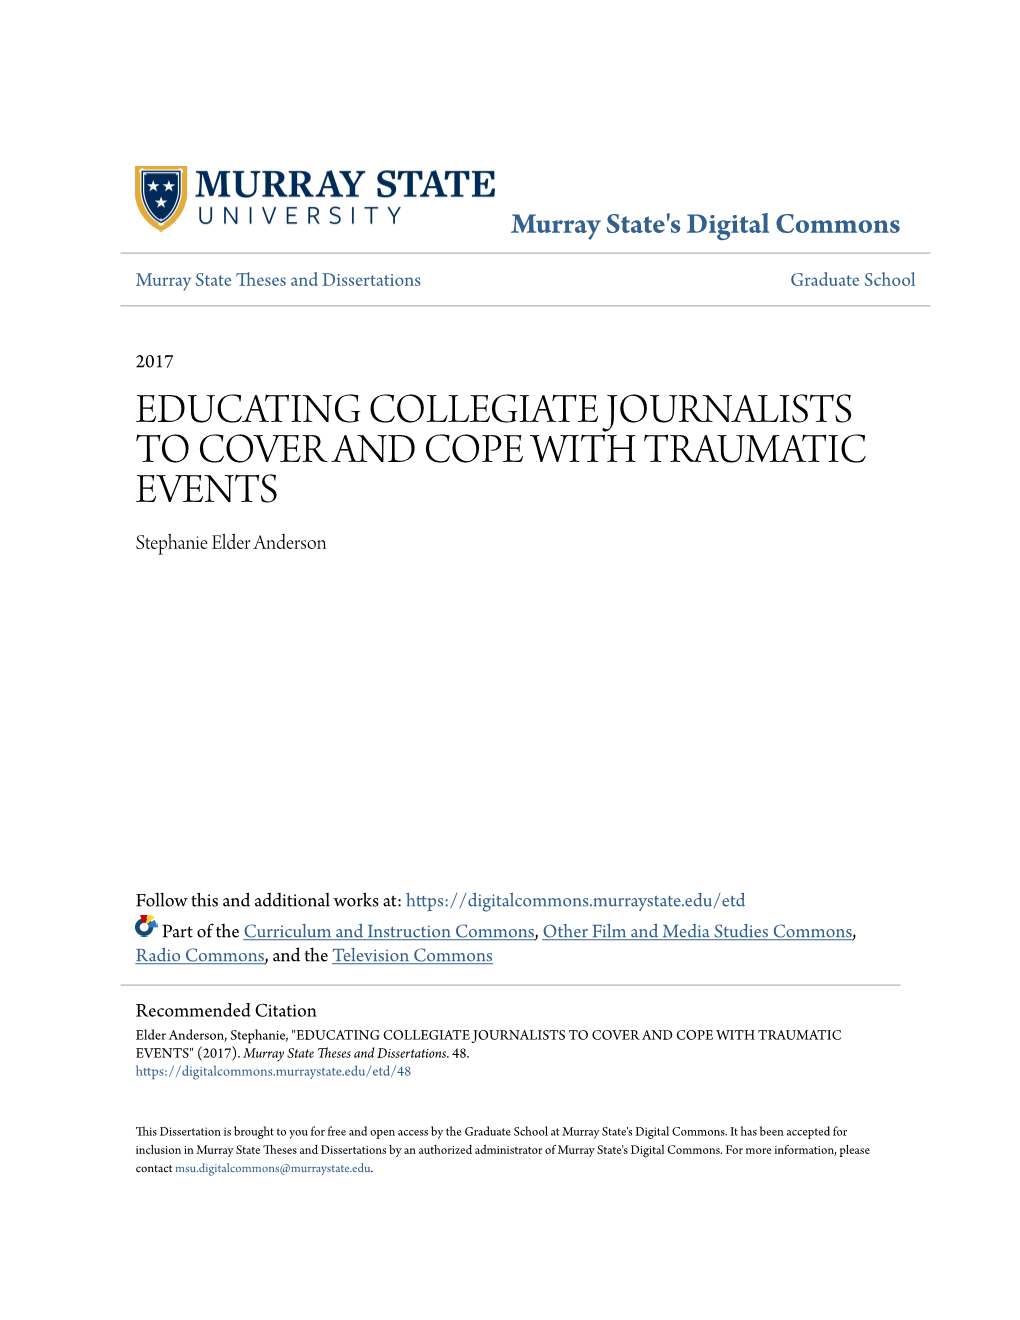 EDUCATING COLLEGIATE JOURNALISTS to COVER and COPE with TRAUMATIC EVENTS Stephanie Elder Anderson